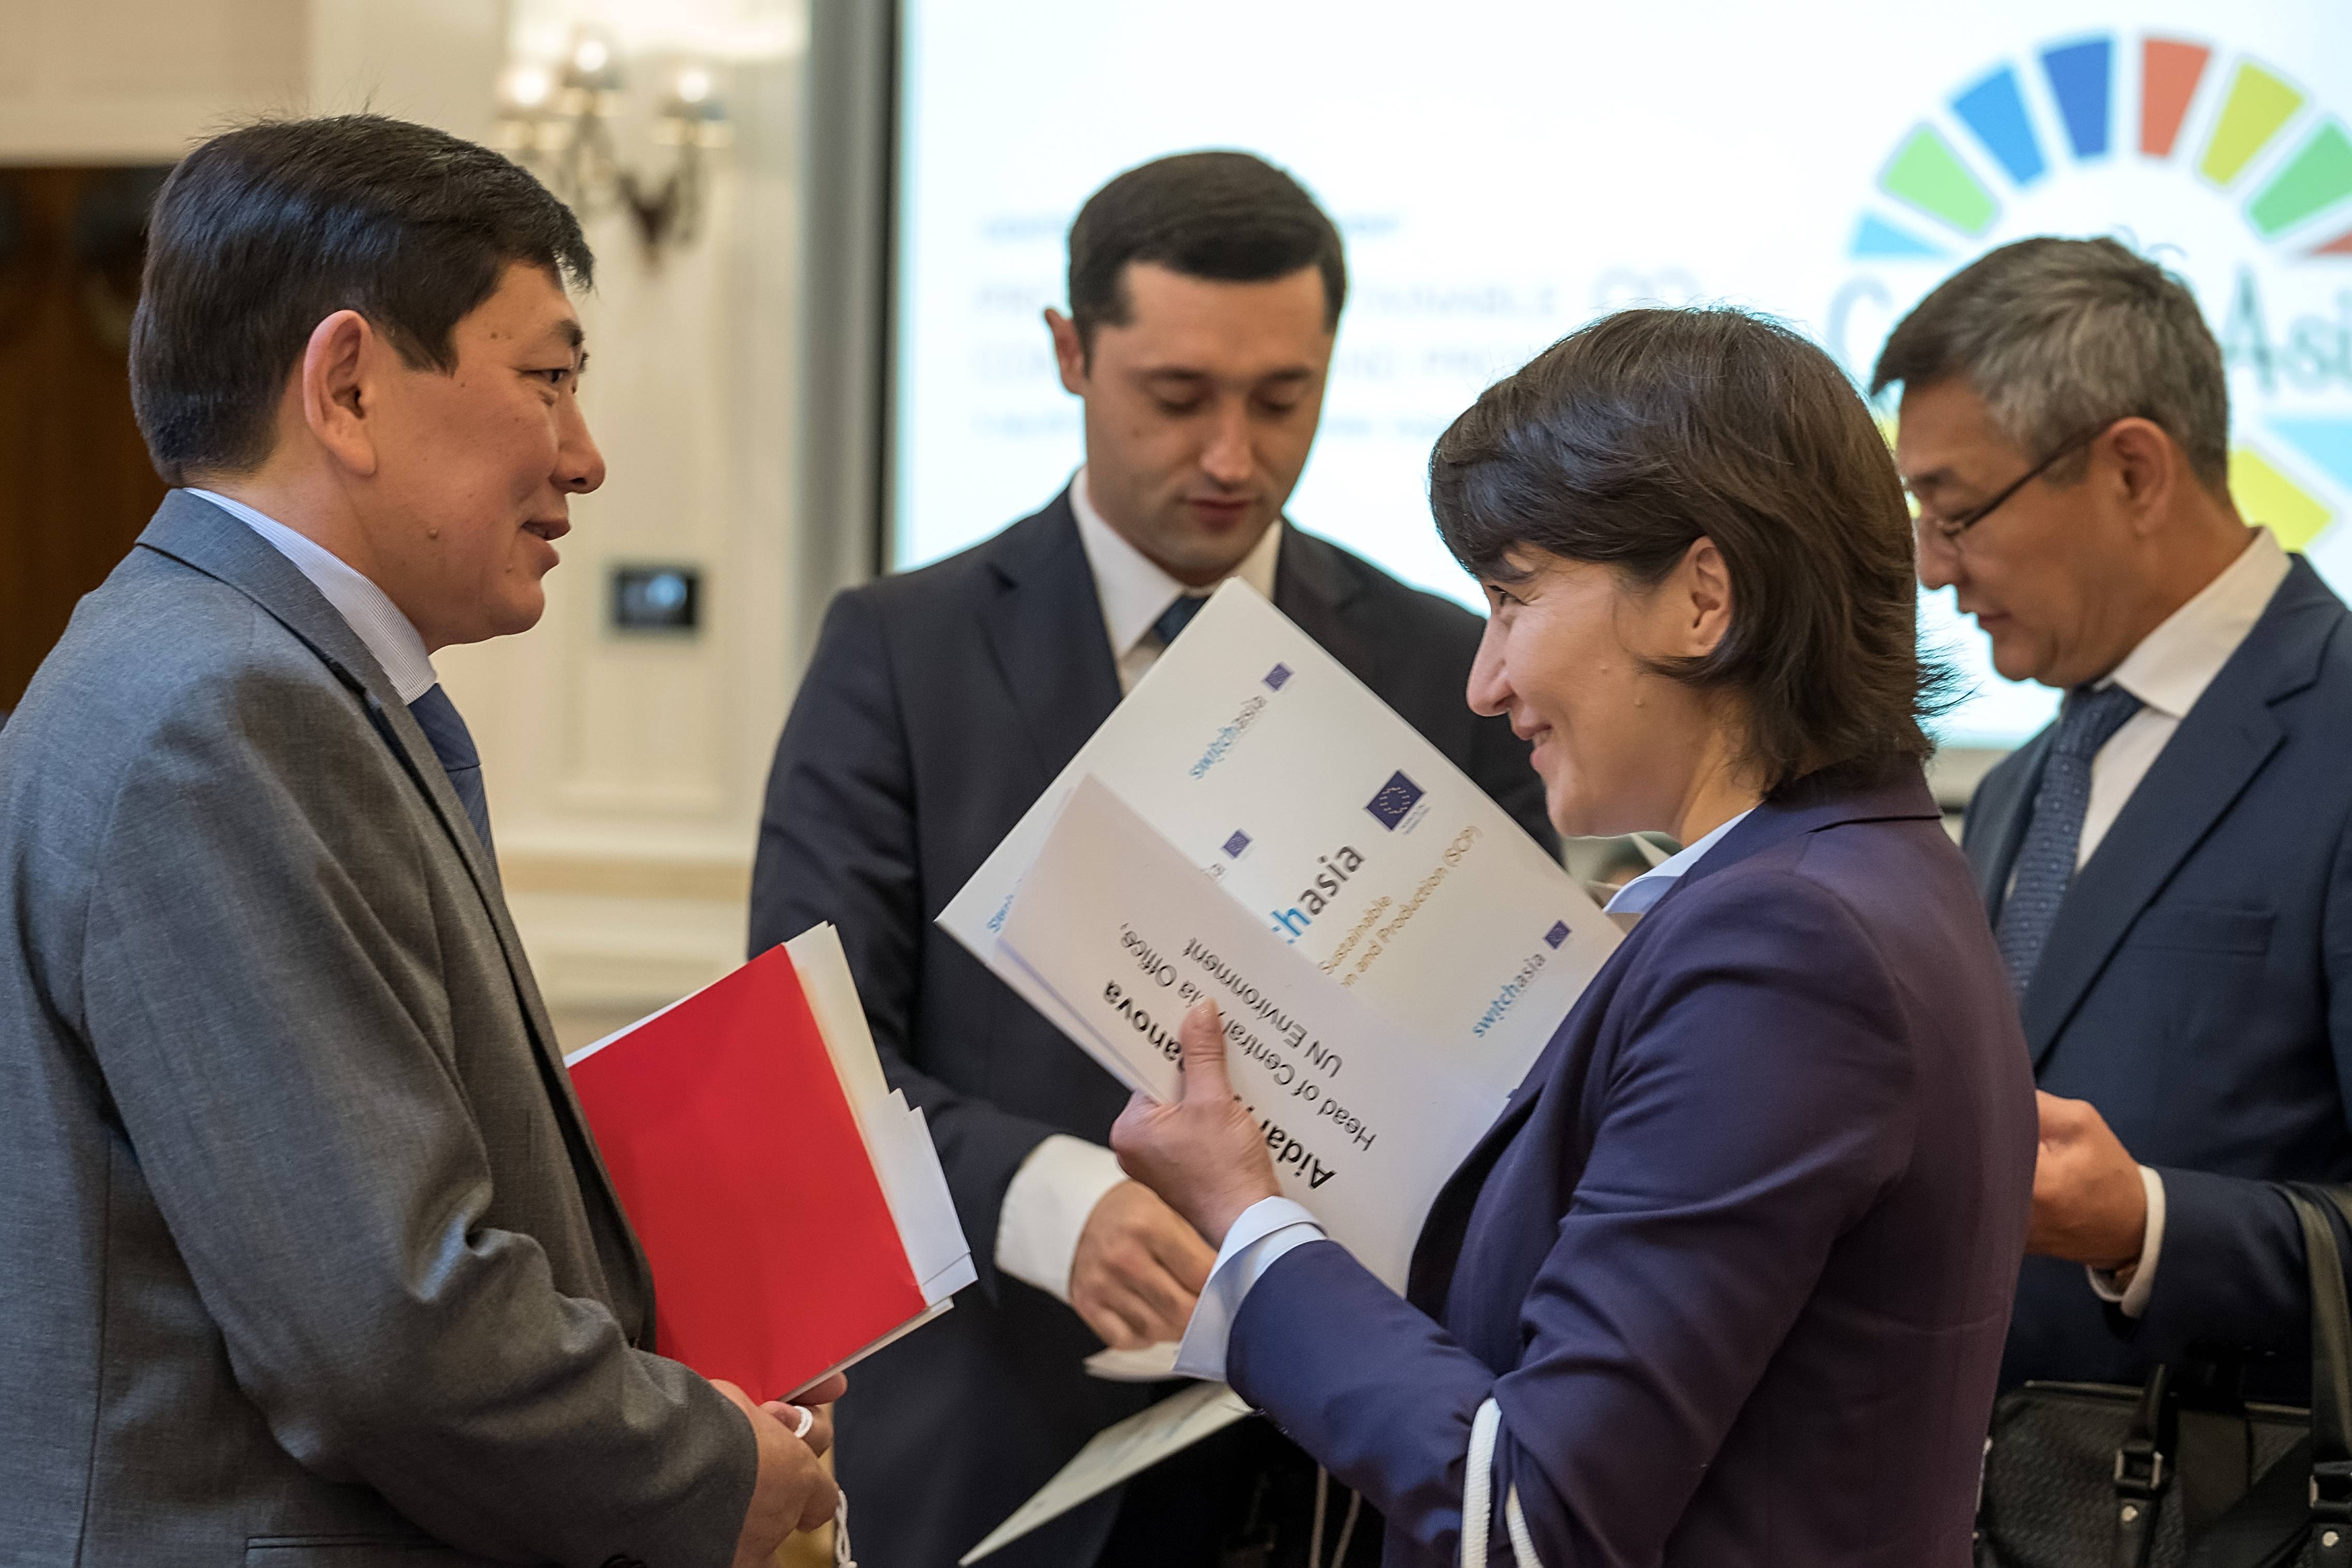 Launch of EU SWITCH-Asia Programme in Central Asia